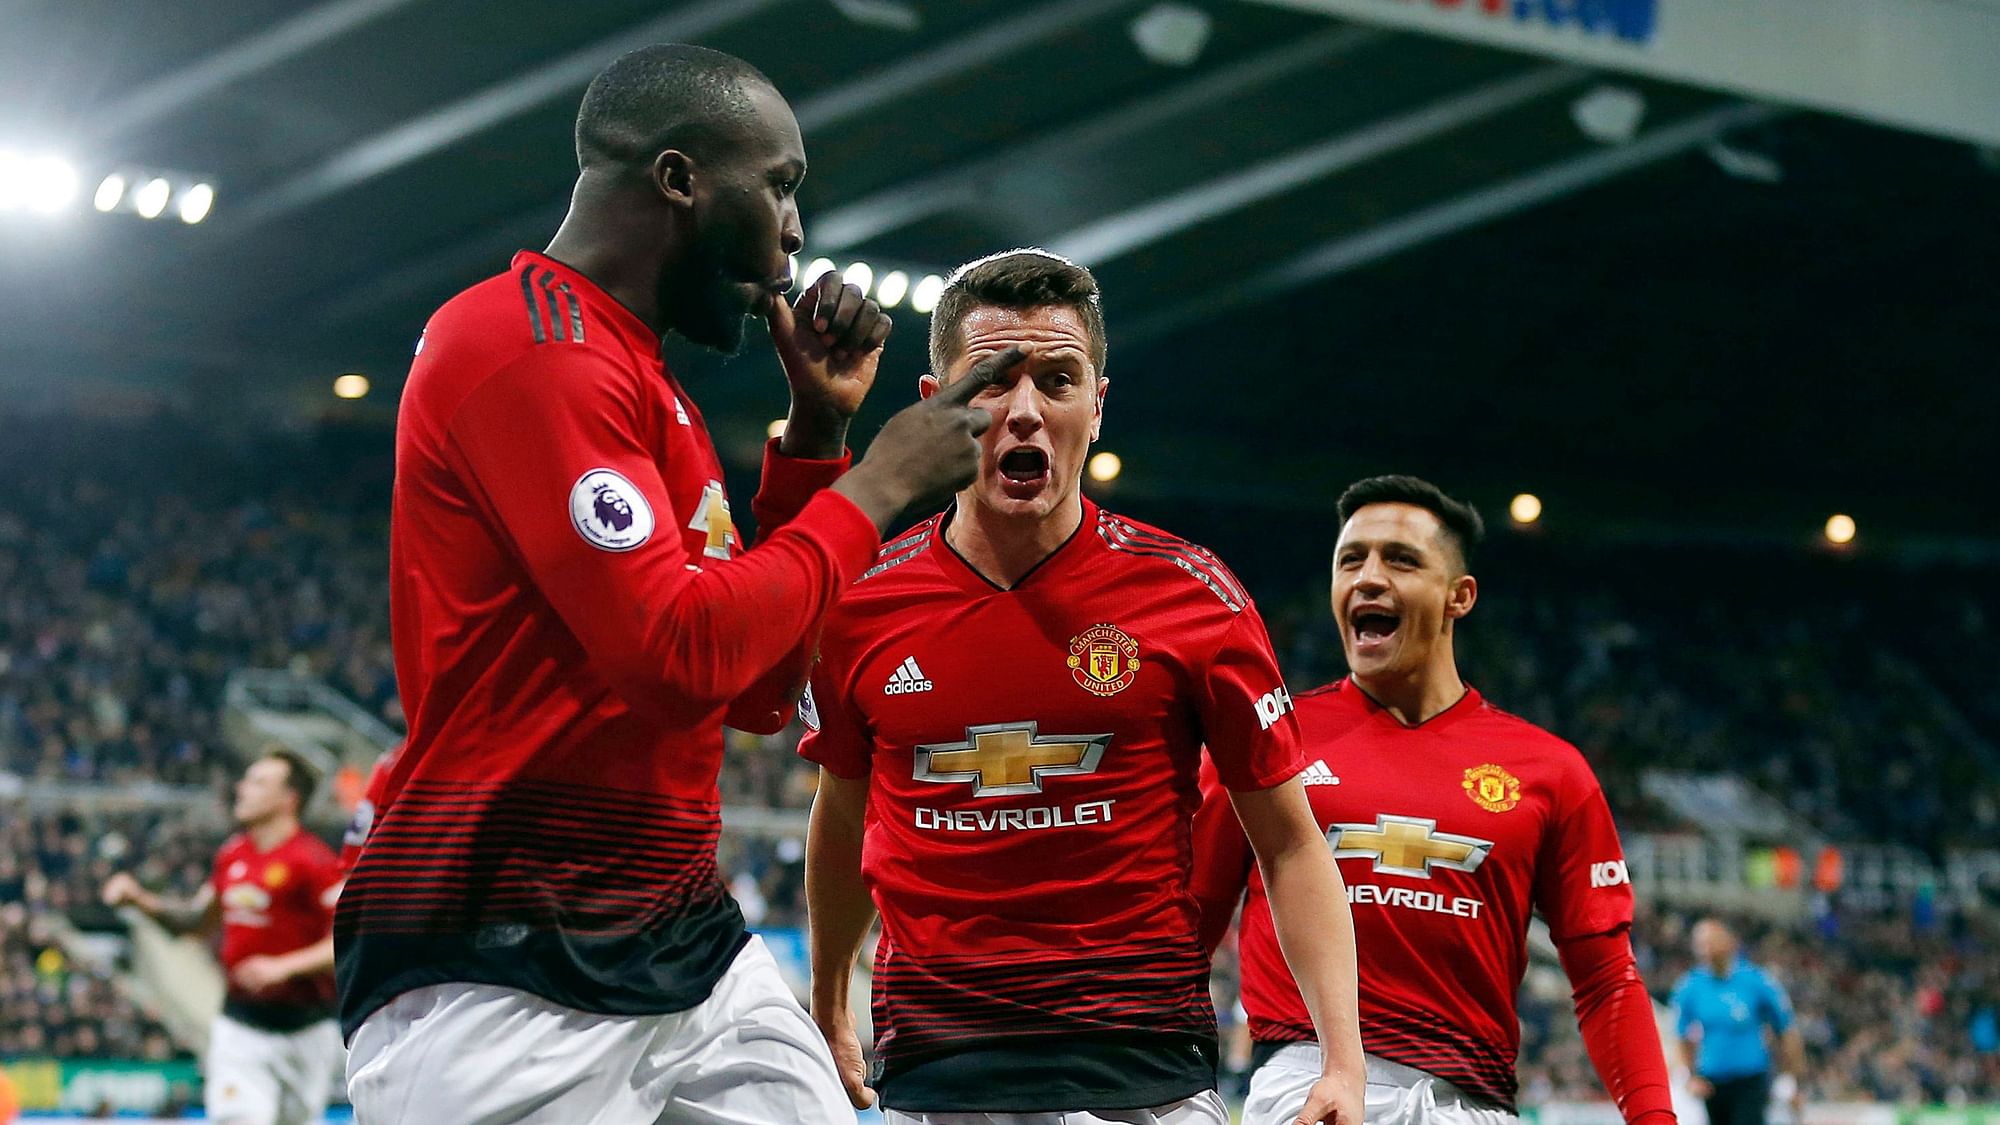 Manchester United’s Romelu Lukaku celebrates scoring his side’s first goal of the game during the Premier League match at St James’ Park, Newcastle.&nbsp;